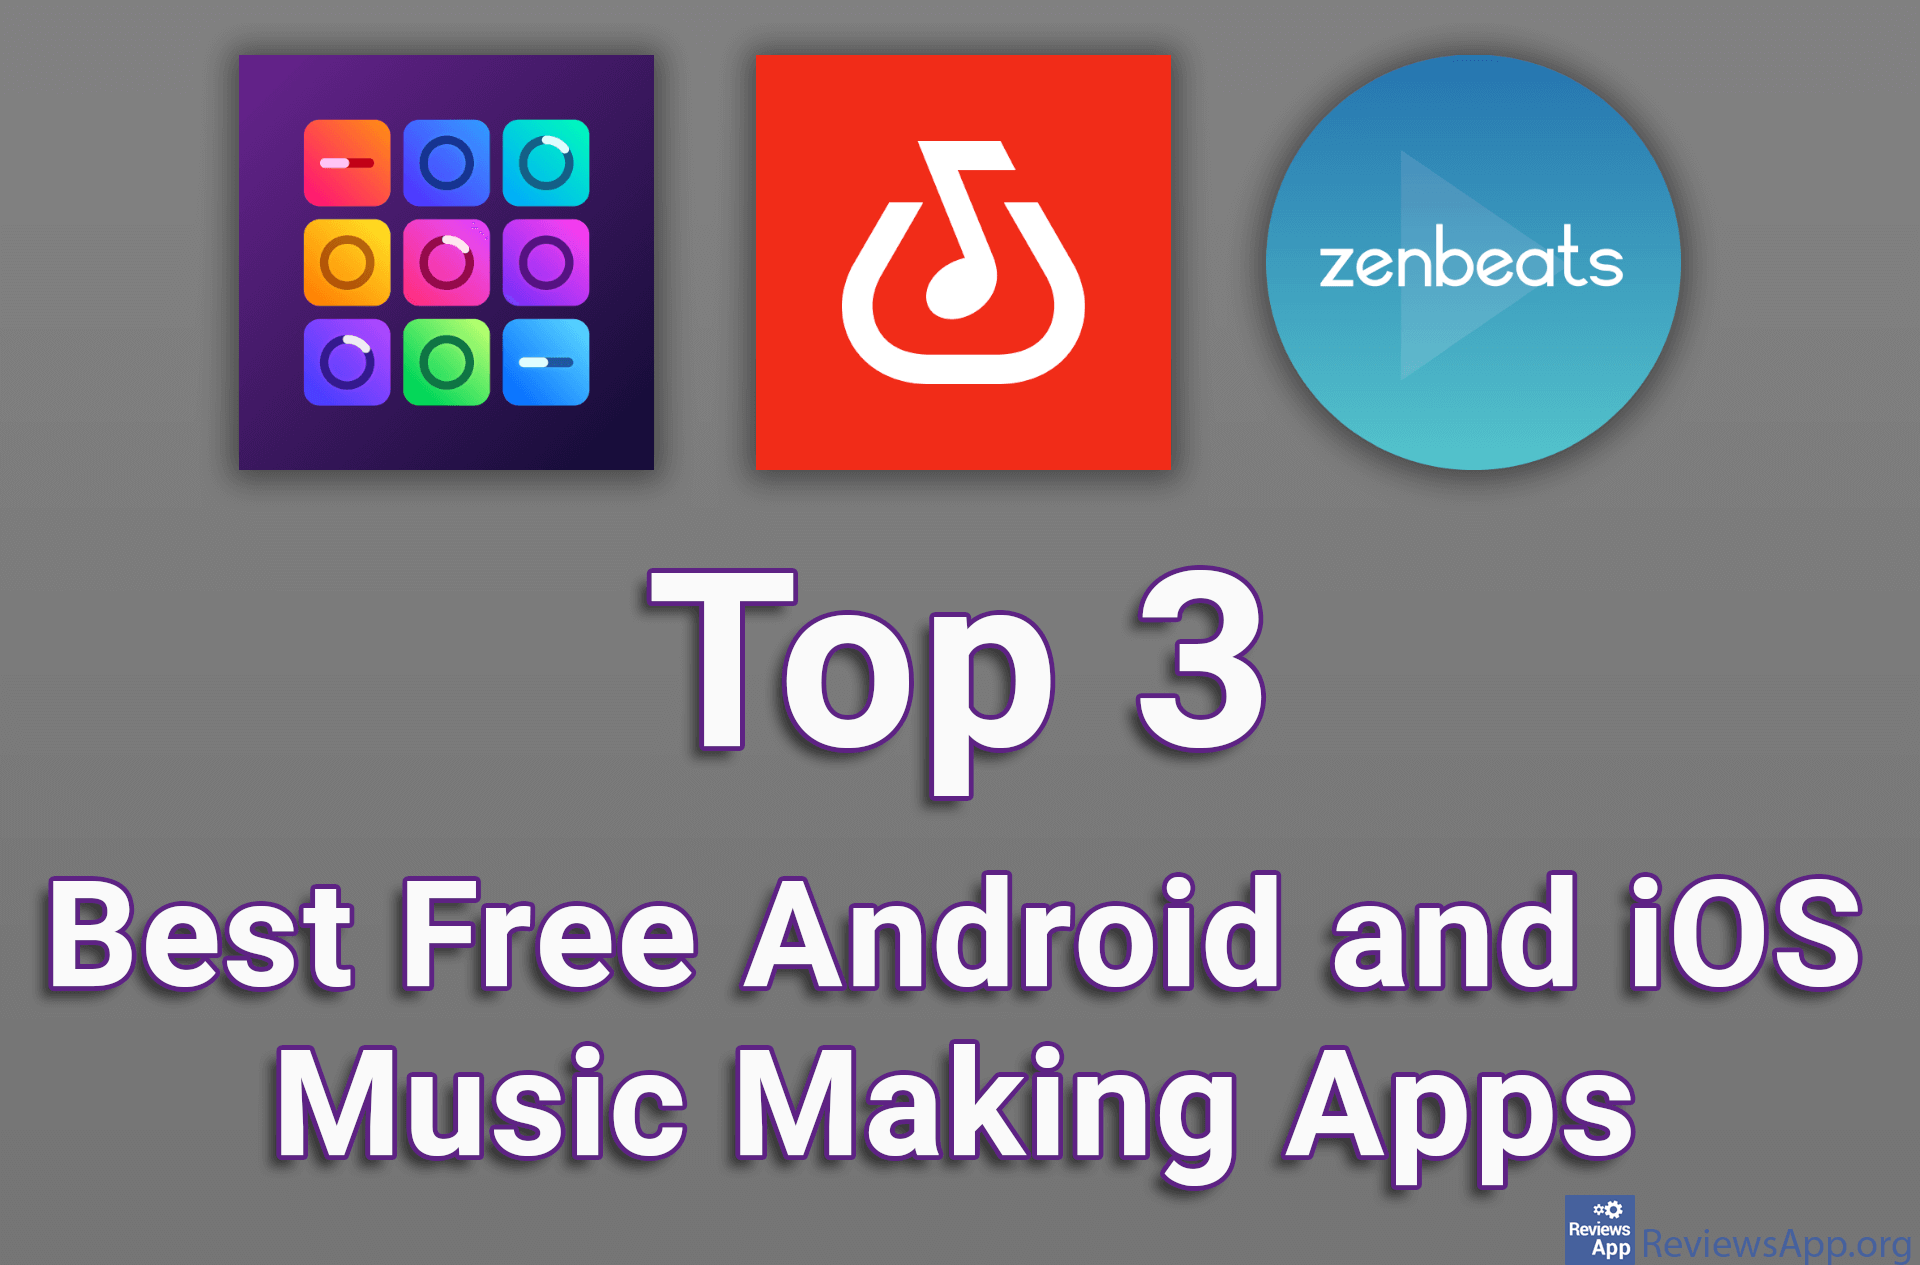 Top 3 Best Free Android and iOS Music Making Apps